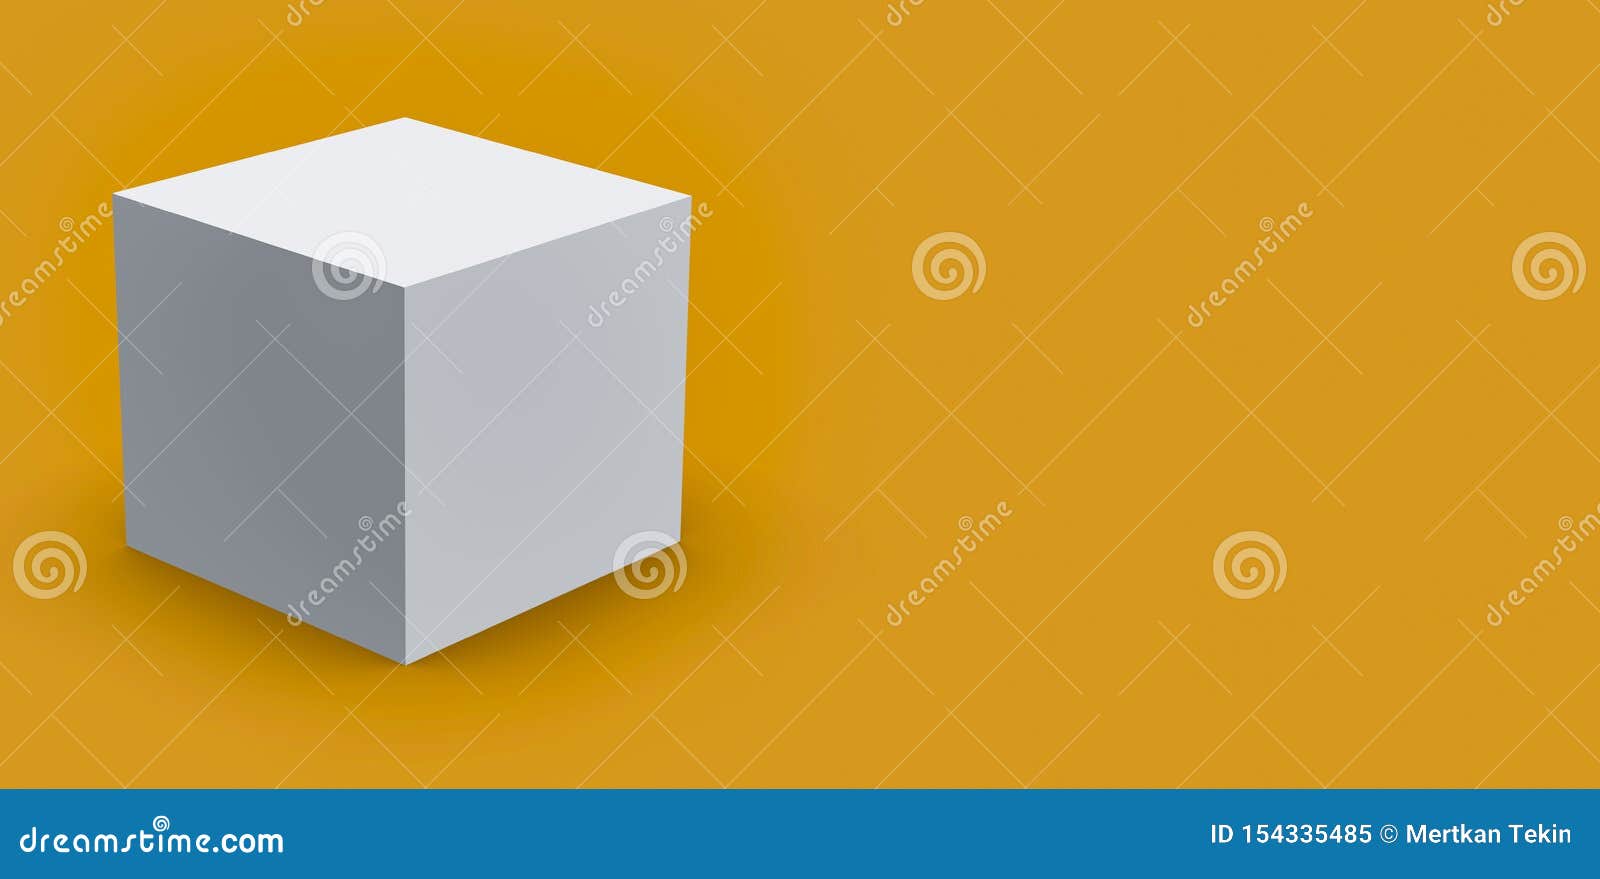 Download 3d Cube Box Render On Isolated Background For Product ...